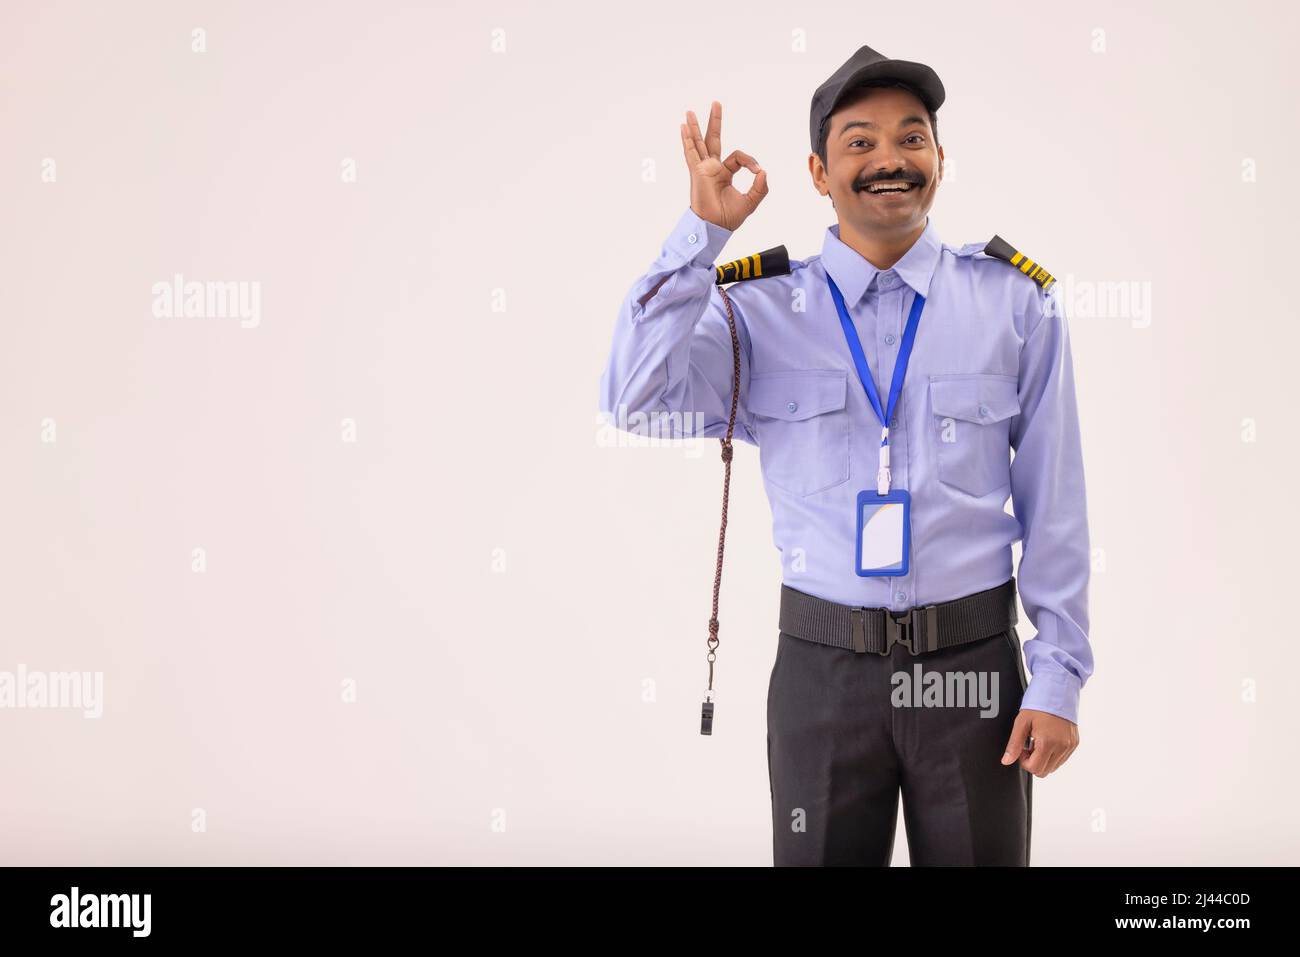 Portrait of security guard gesturing with his fingers Stock Photo